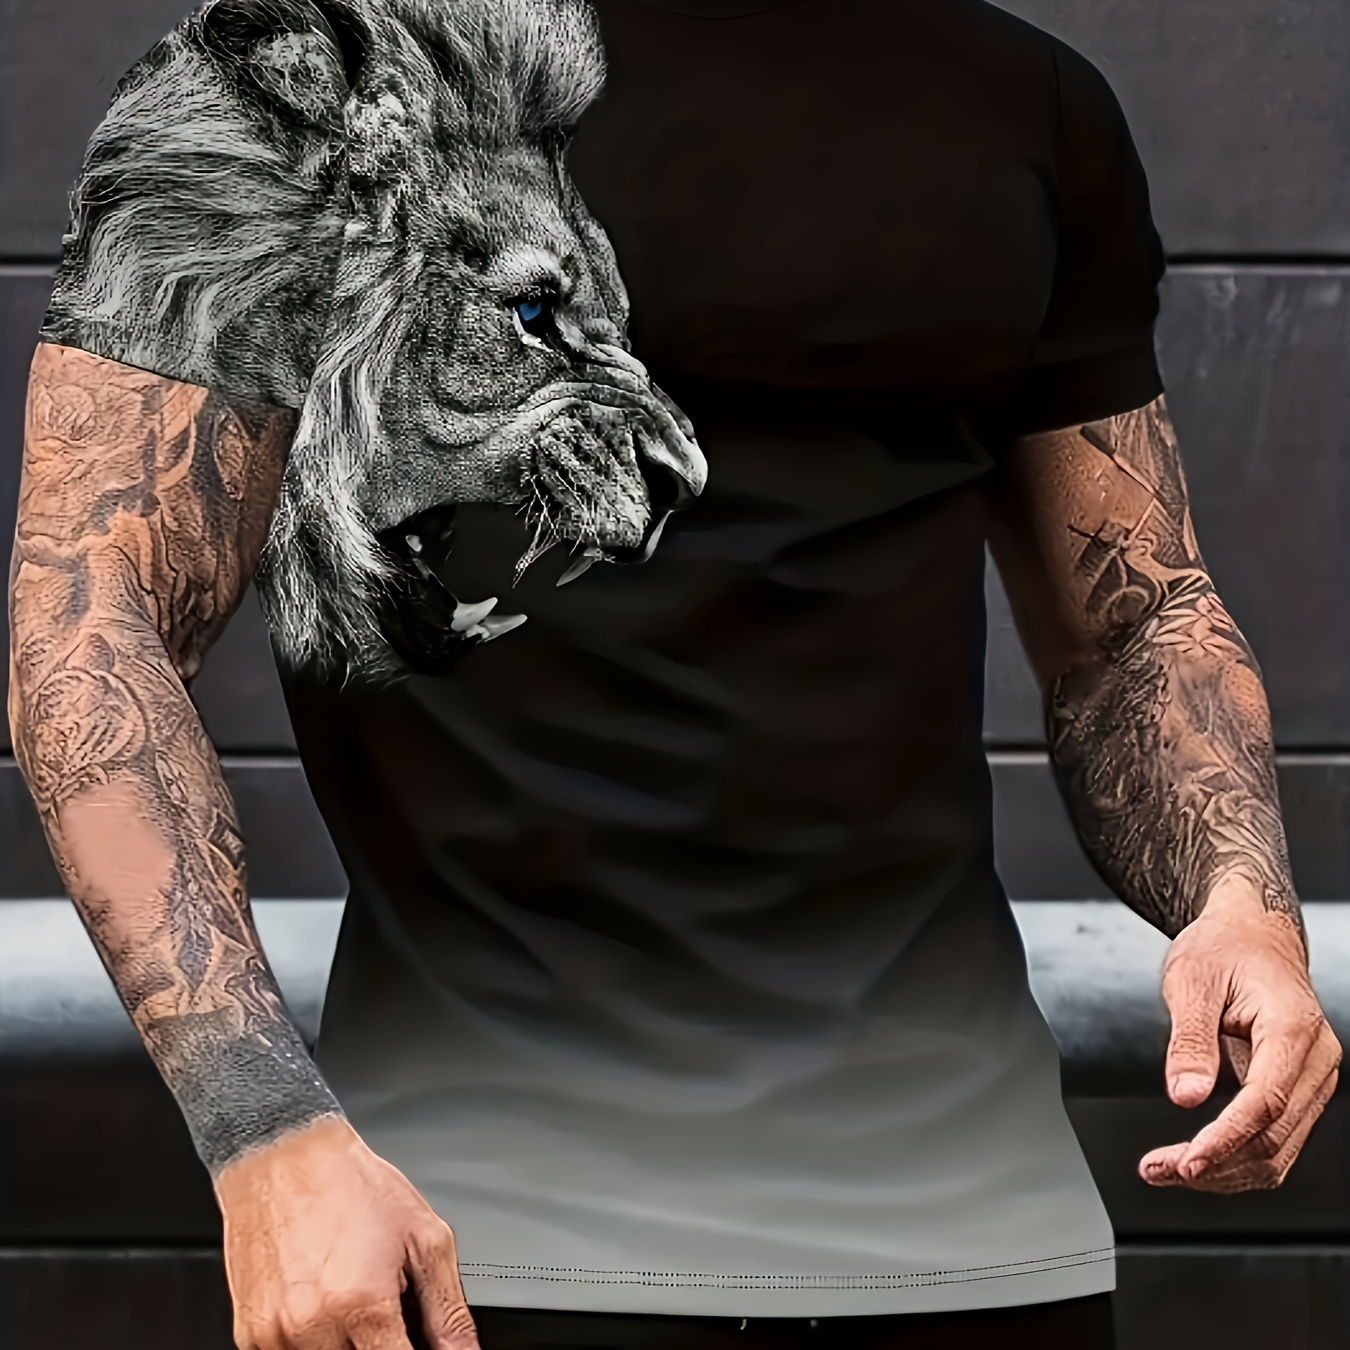 

Fierce Lion Pattern 3d Printed Crew Neck Short Sleeve T-shirt For Men, Casual Summer T-shirt For Daily Wear And Vacation Resorts